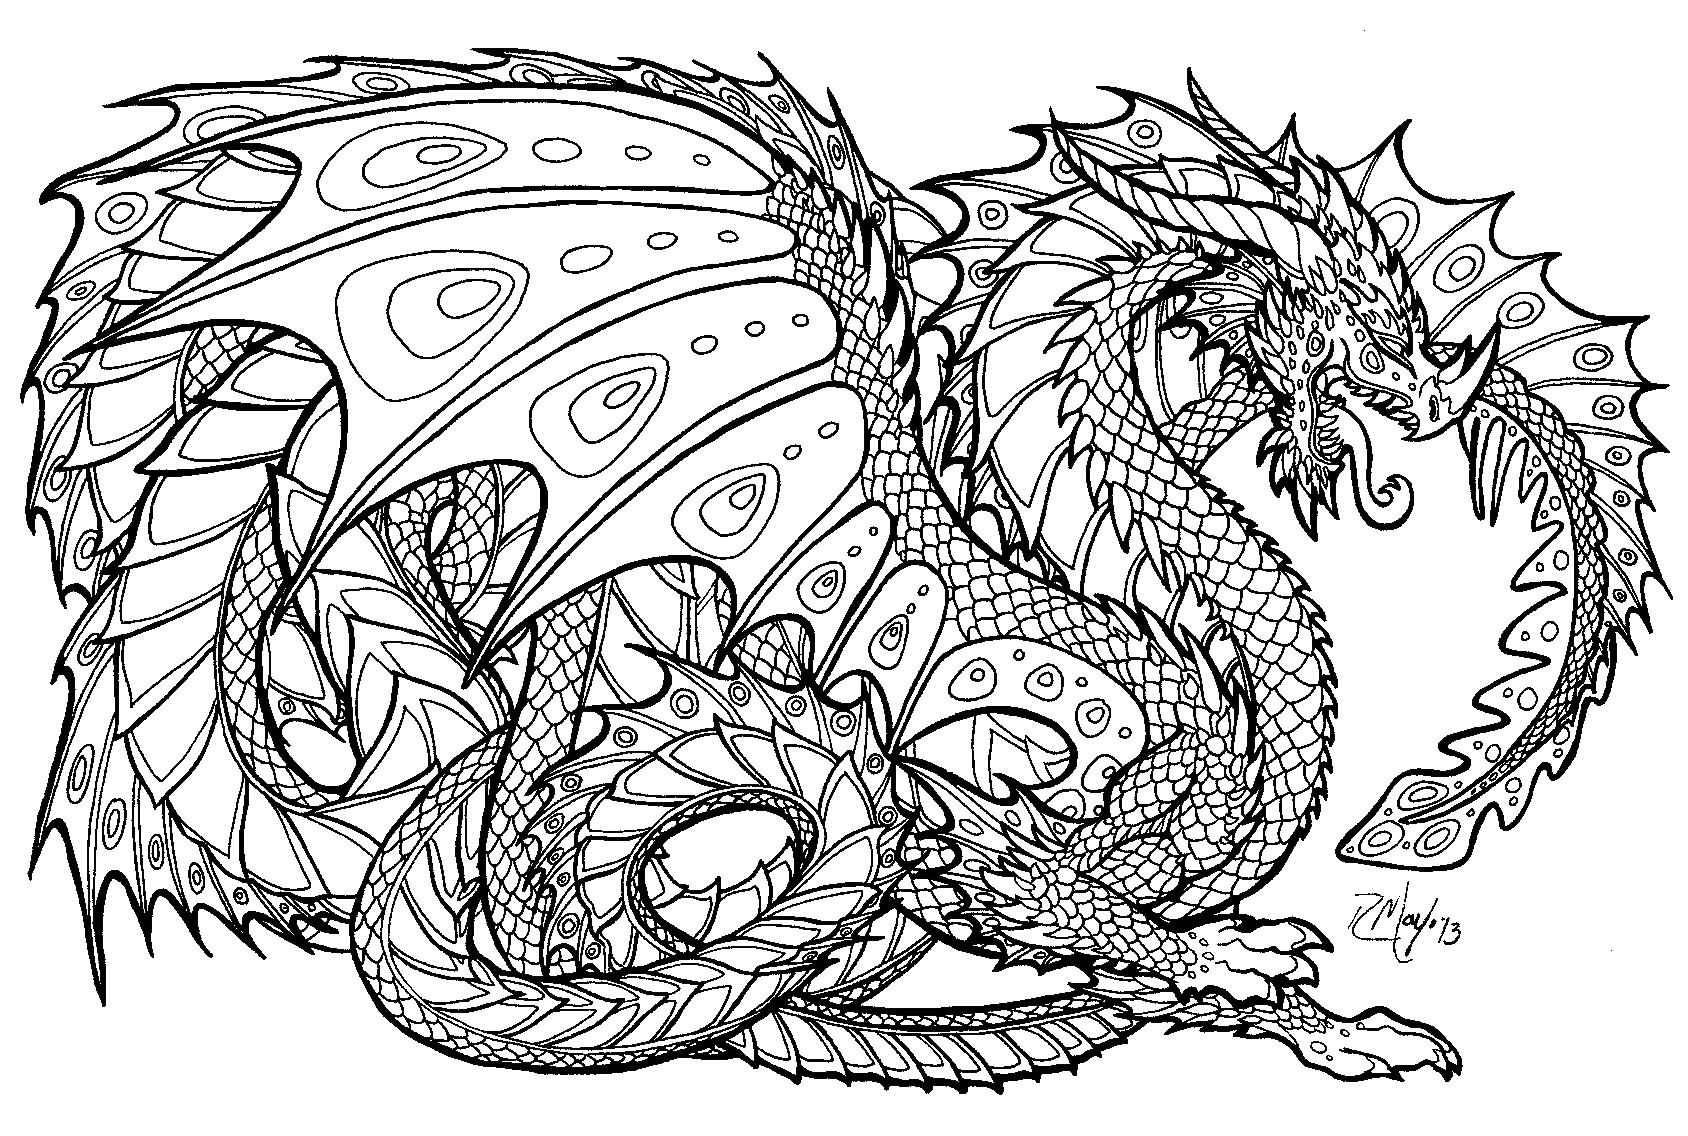 Dragon Coloring Books For Adults
 Dragon coloring pages for adults to and print for